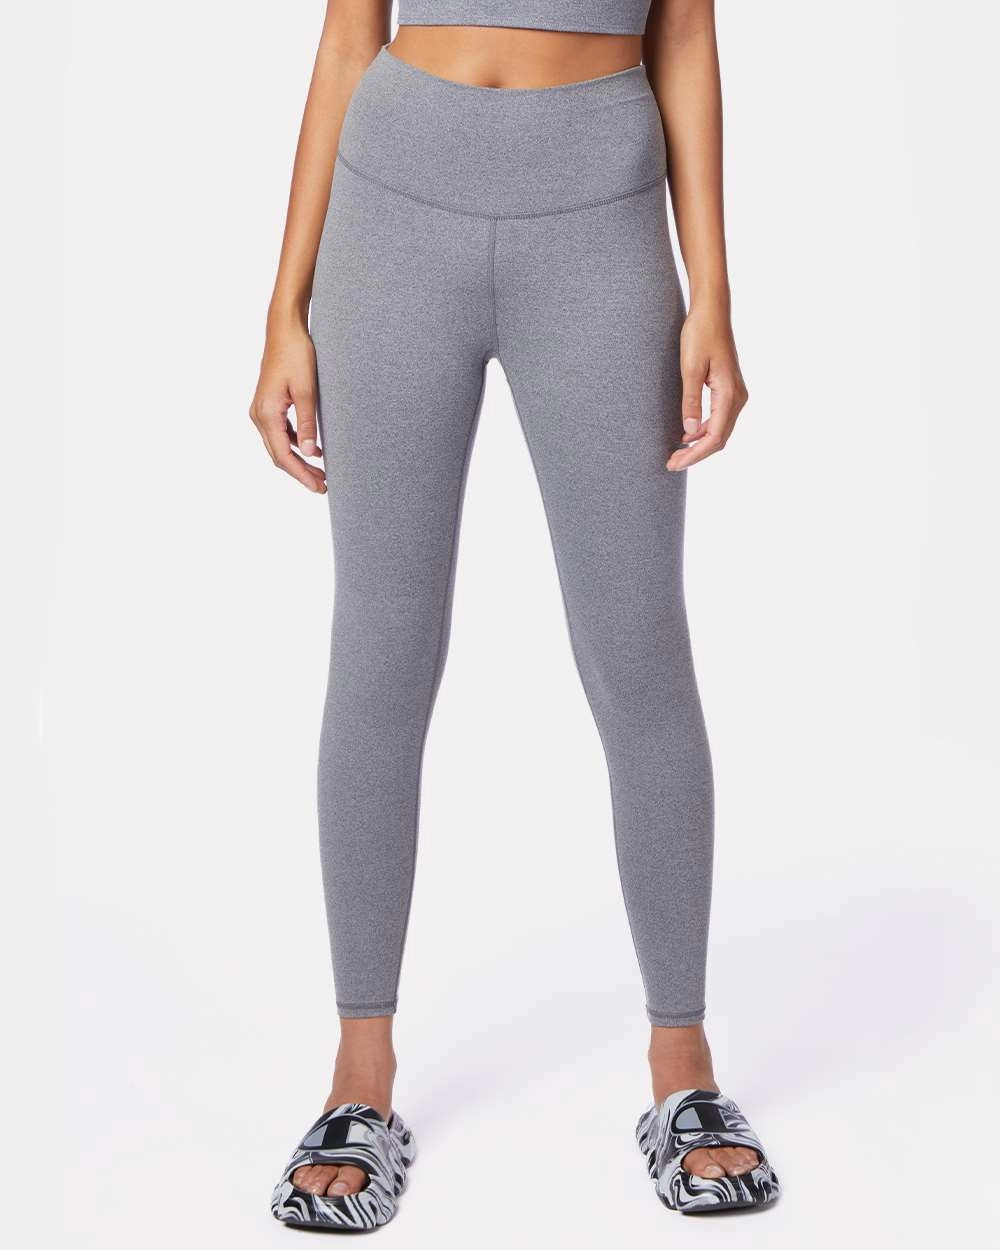 Champion Clothing CHP120 Women's Sport Soft Touch Leggings - From $30.34